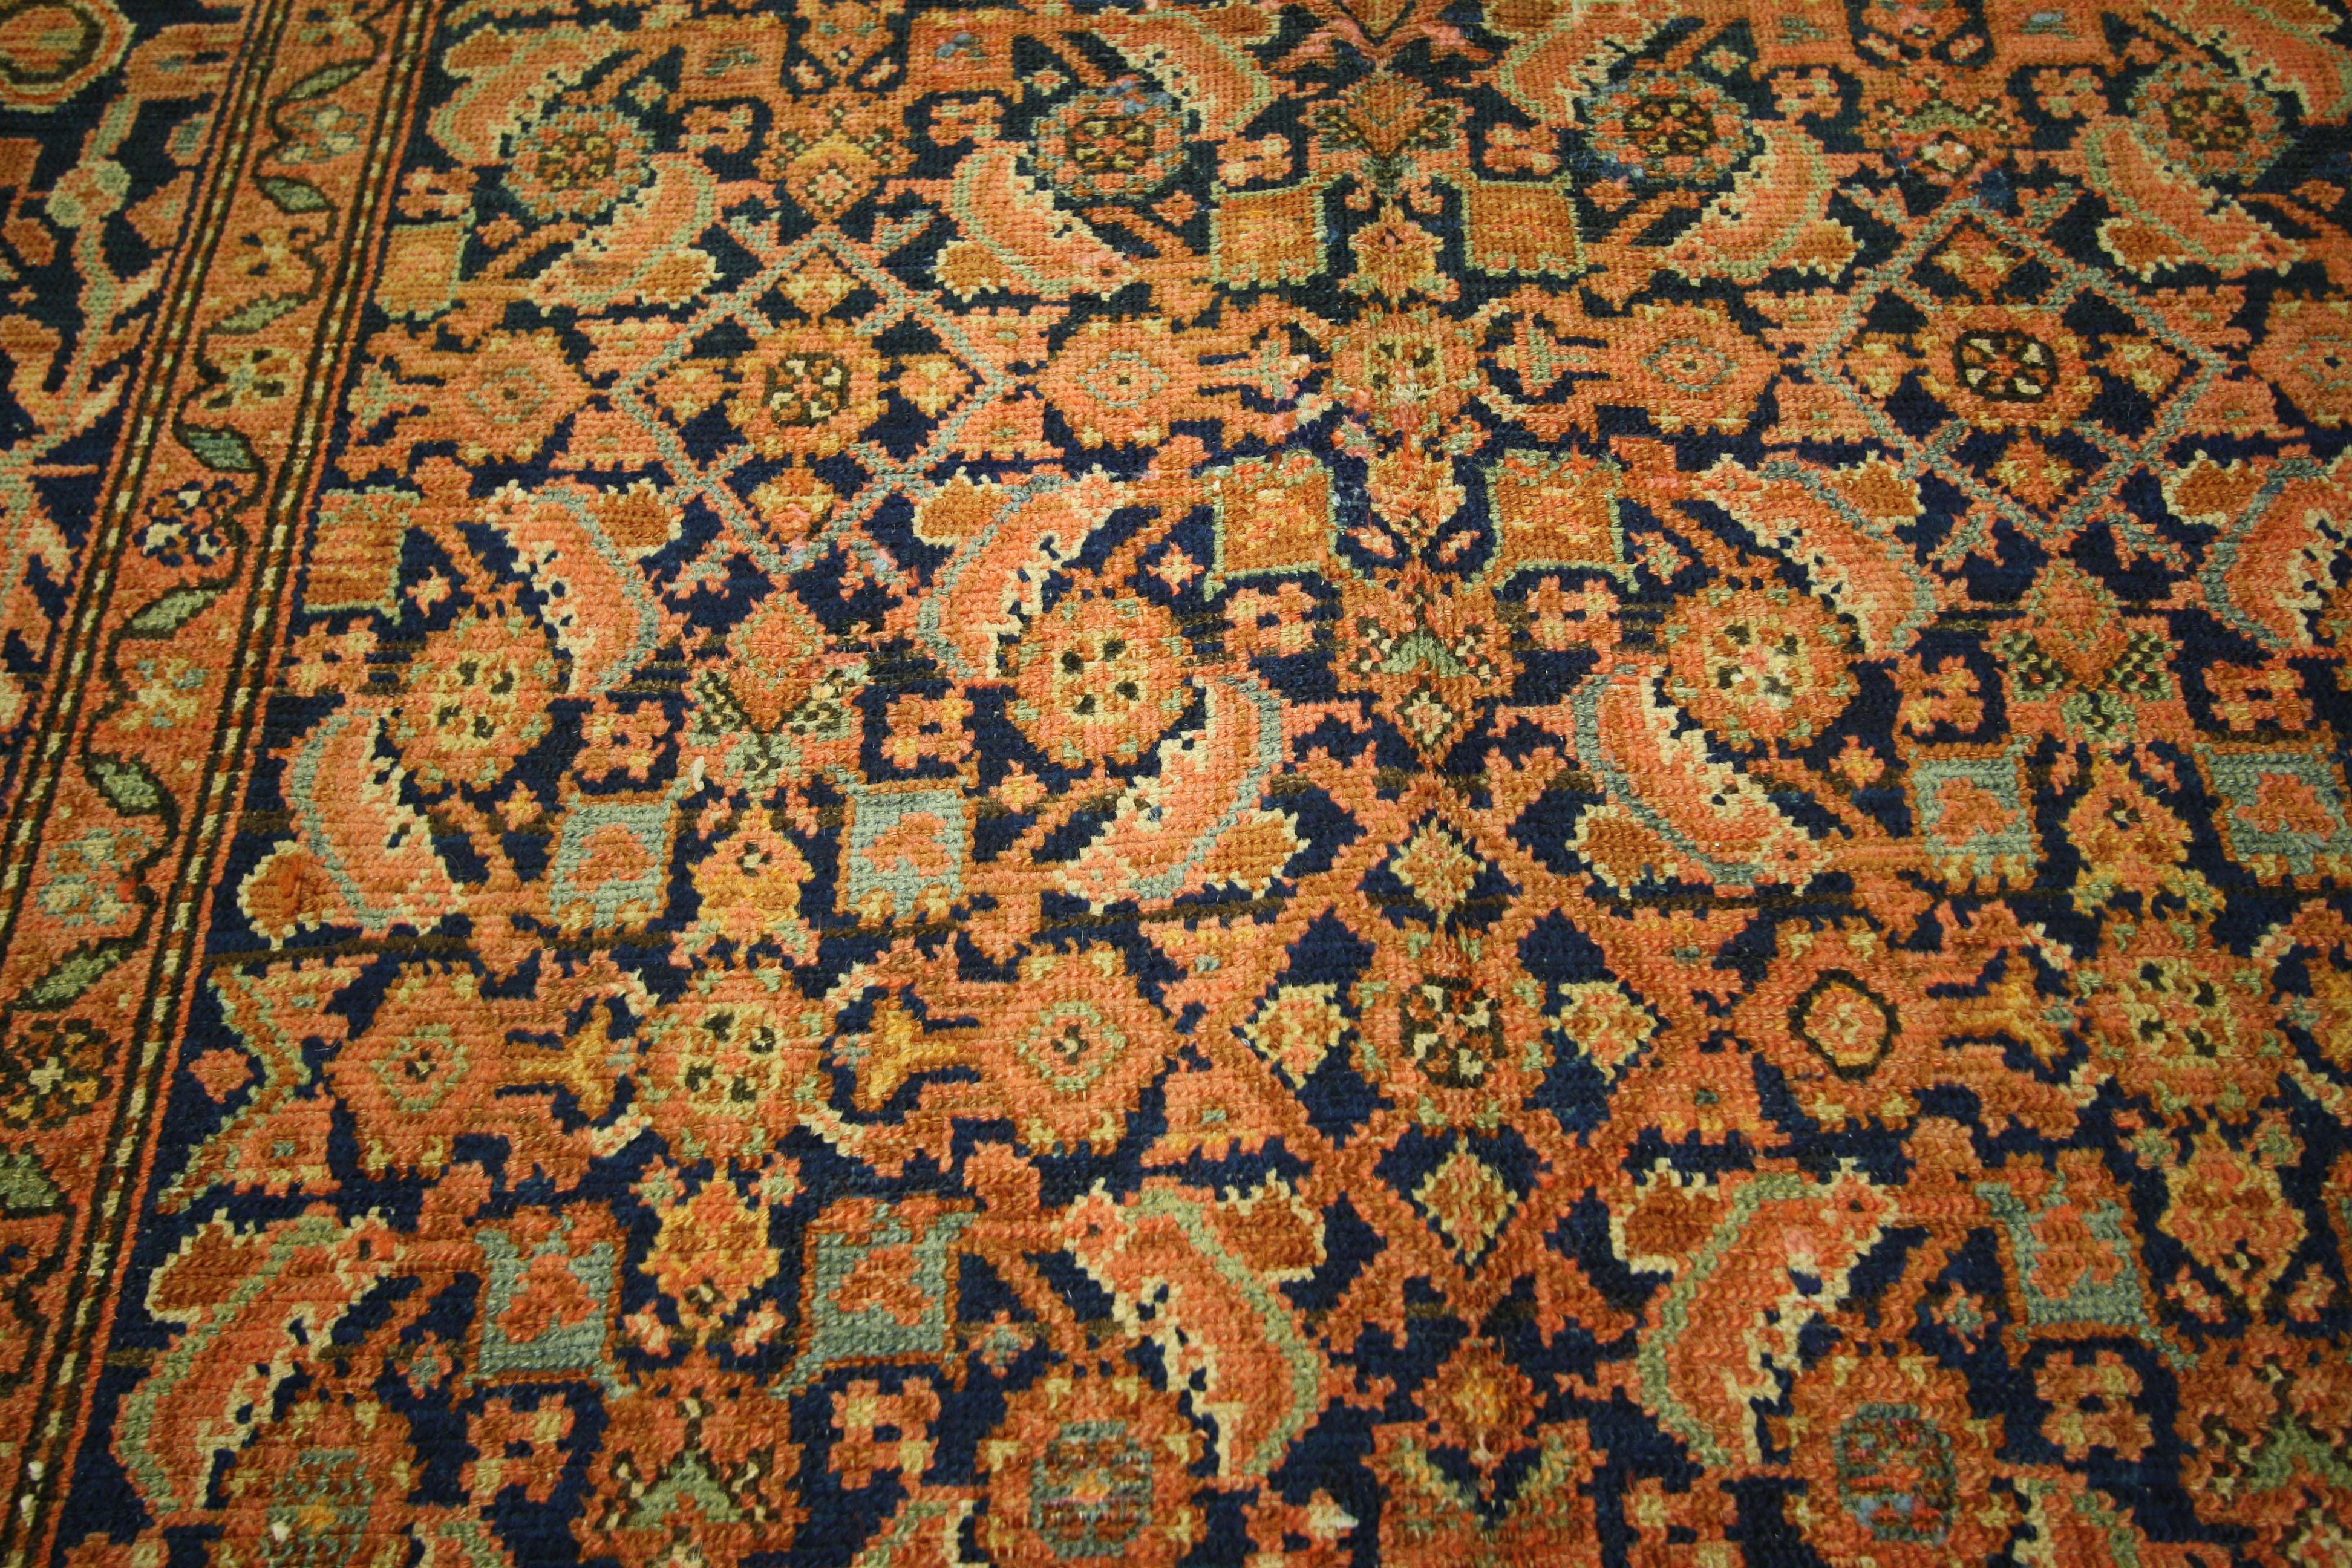 75376 Vintage Persian Malayer Gallery rug, Wide Hallway Runner 04'11 X 10'11. This hand knotted wool vintage Persian Malayer rug features a lively all-over Herati design on an abrashed ink blue field. A highly stylized rendition of the classic